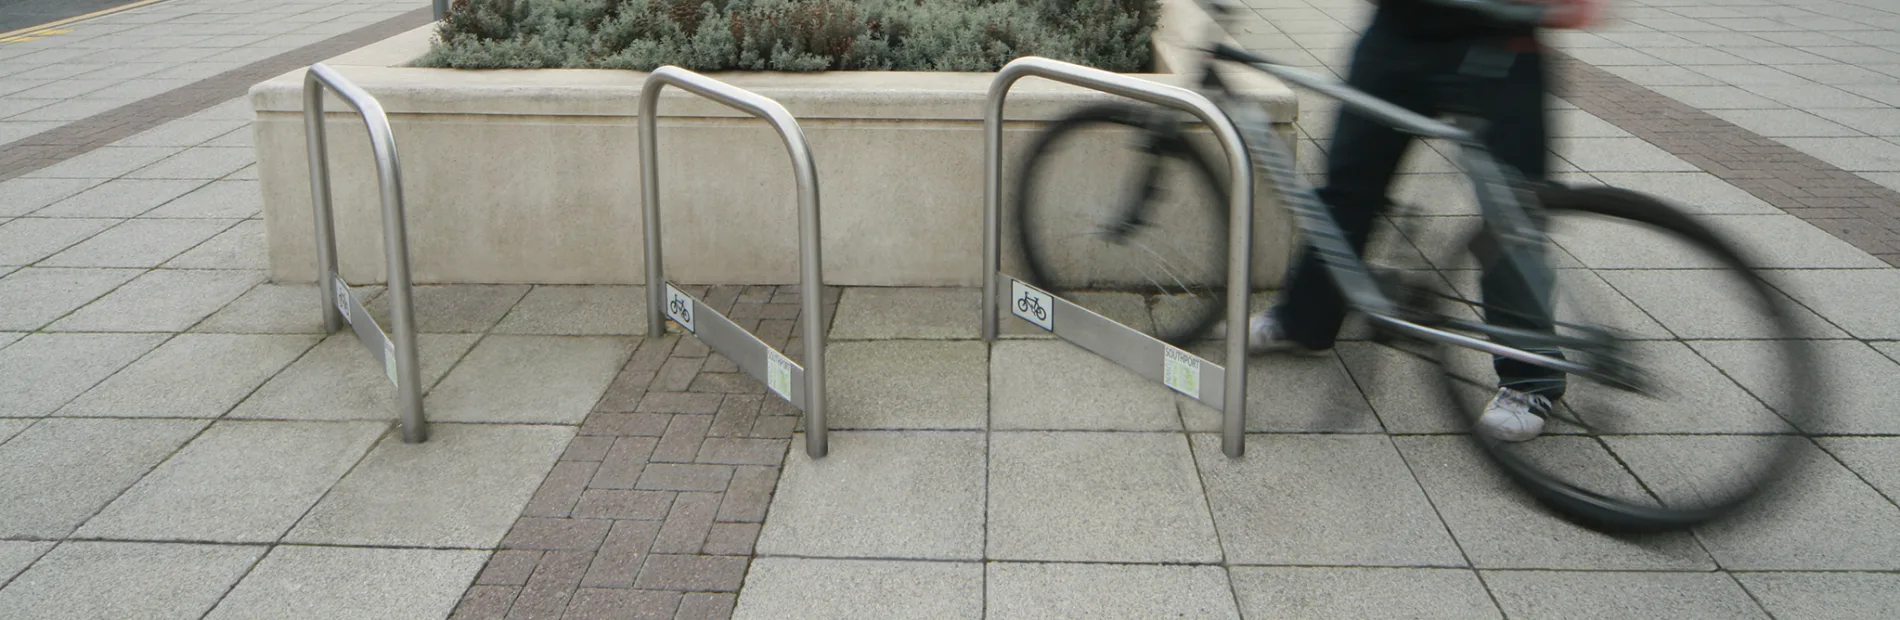 Steel Sheffield cycle stands used for storing or securing bicycles.